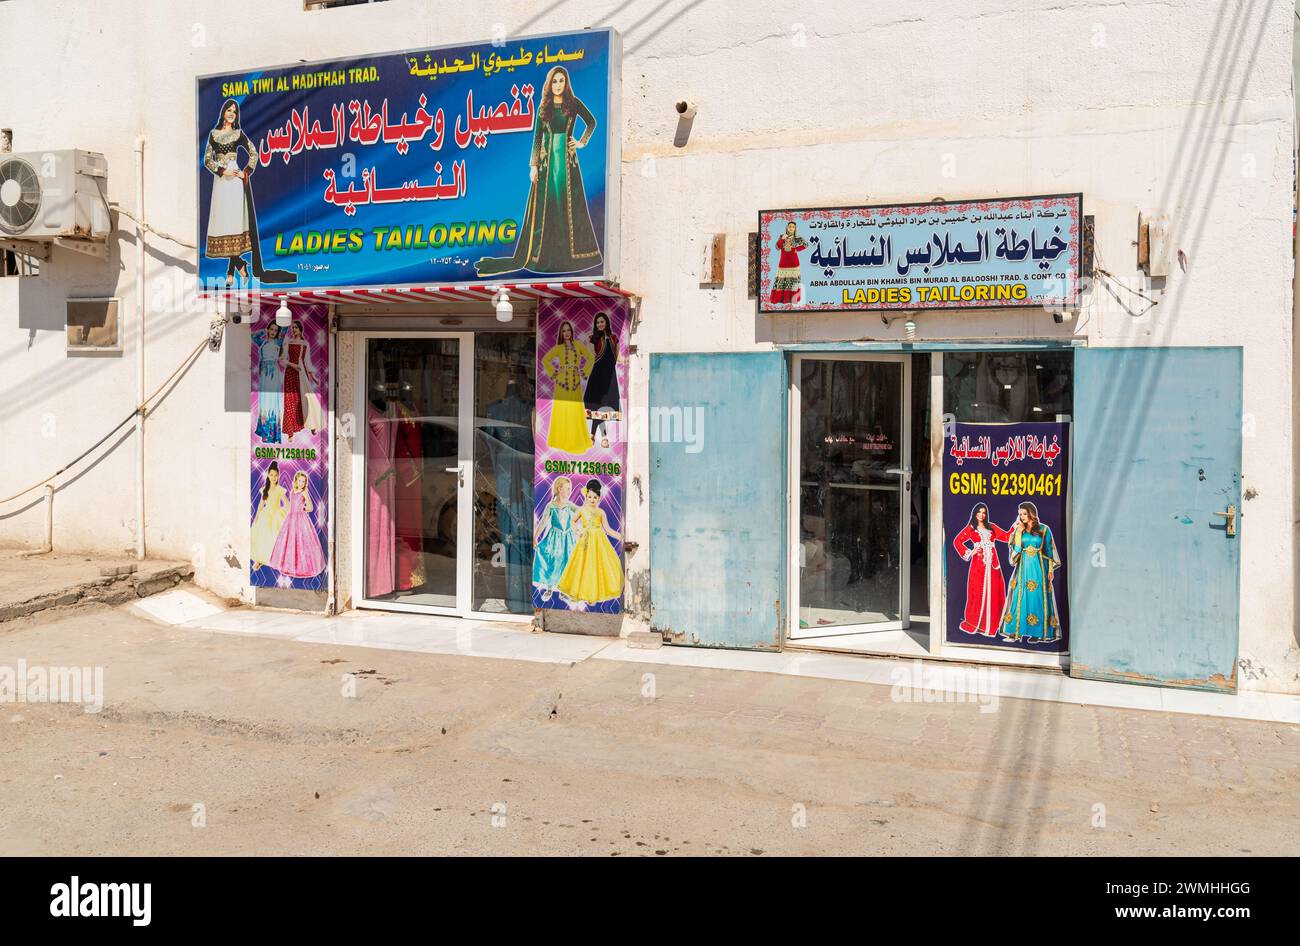 Sur, Oman - February 15, 2020: Typical Omani ladies tailoring shop on the Sur city street. Stock Photo